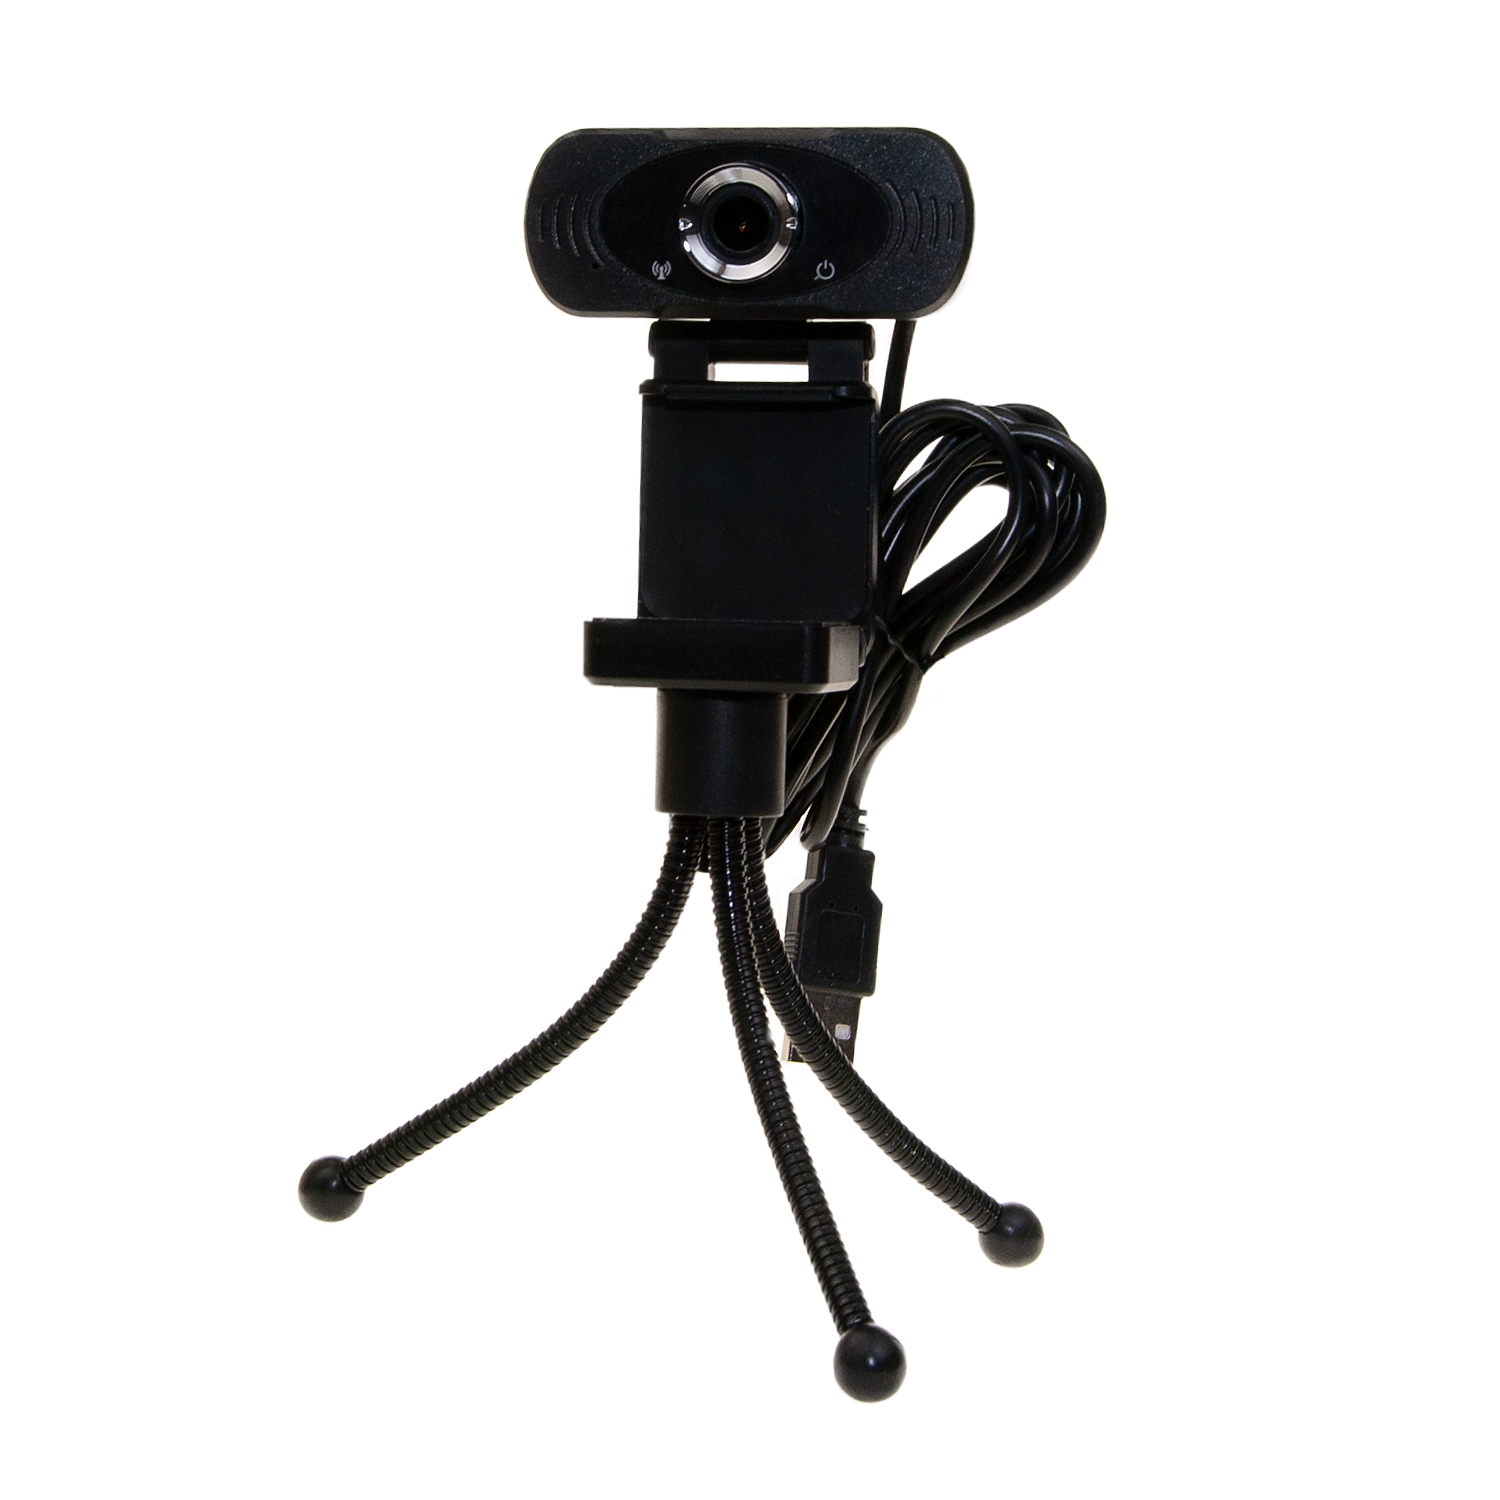 1080p Sonix HD USB Webcam with built-in Microphone